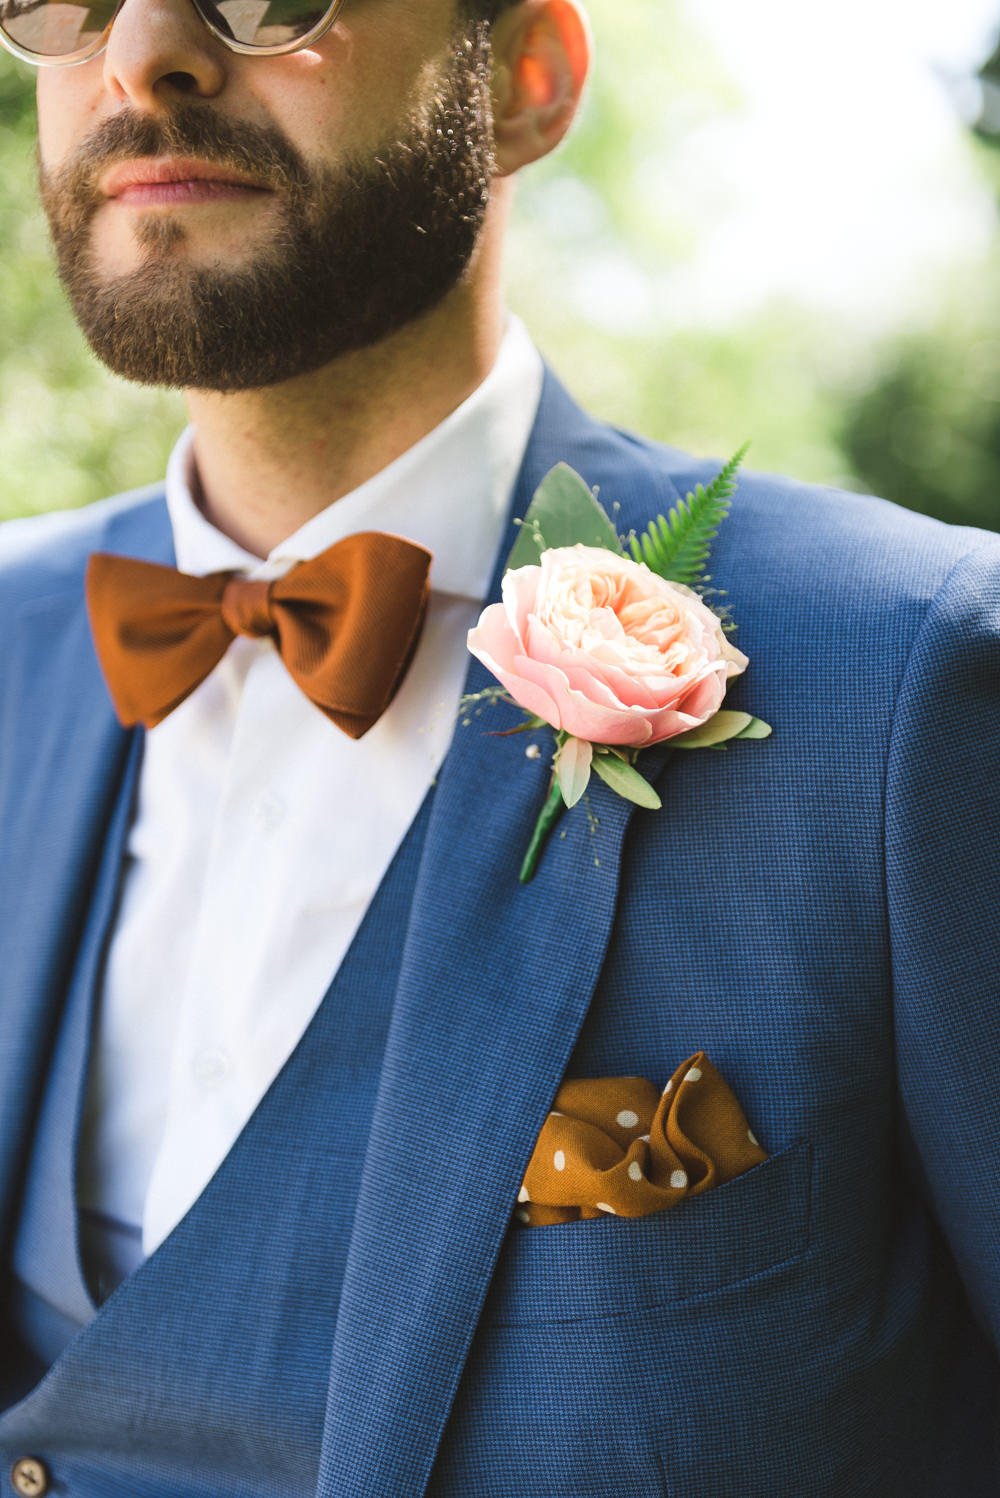 copper trend for the groom